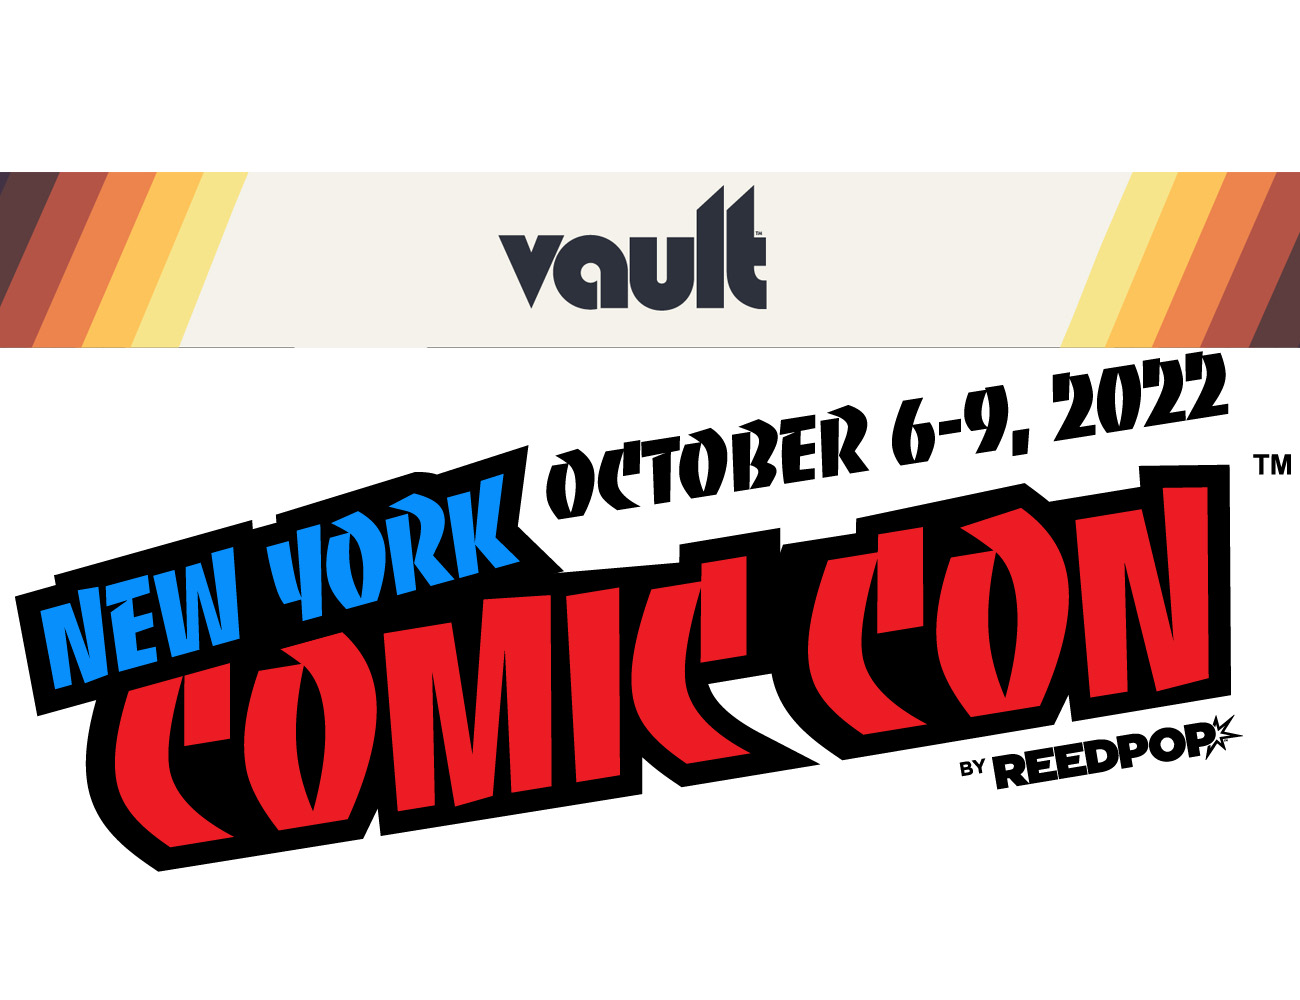 NYCC 2022: Vault details NYCC 2022 panel and signing schedule